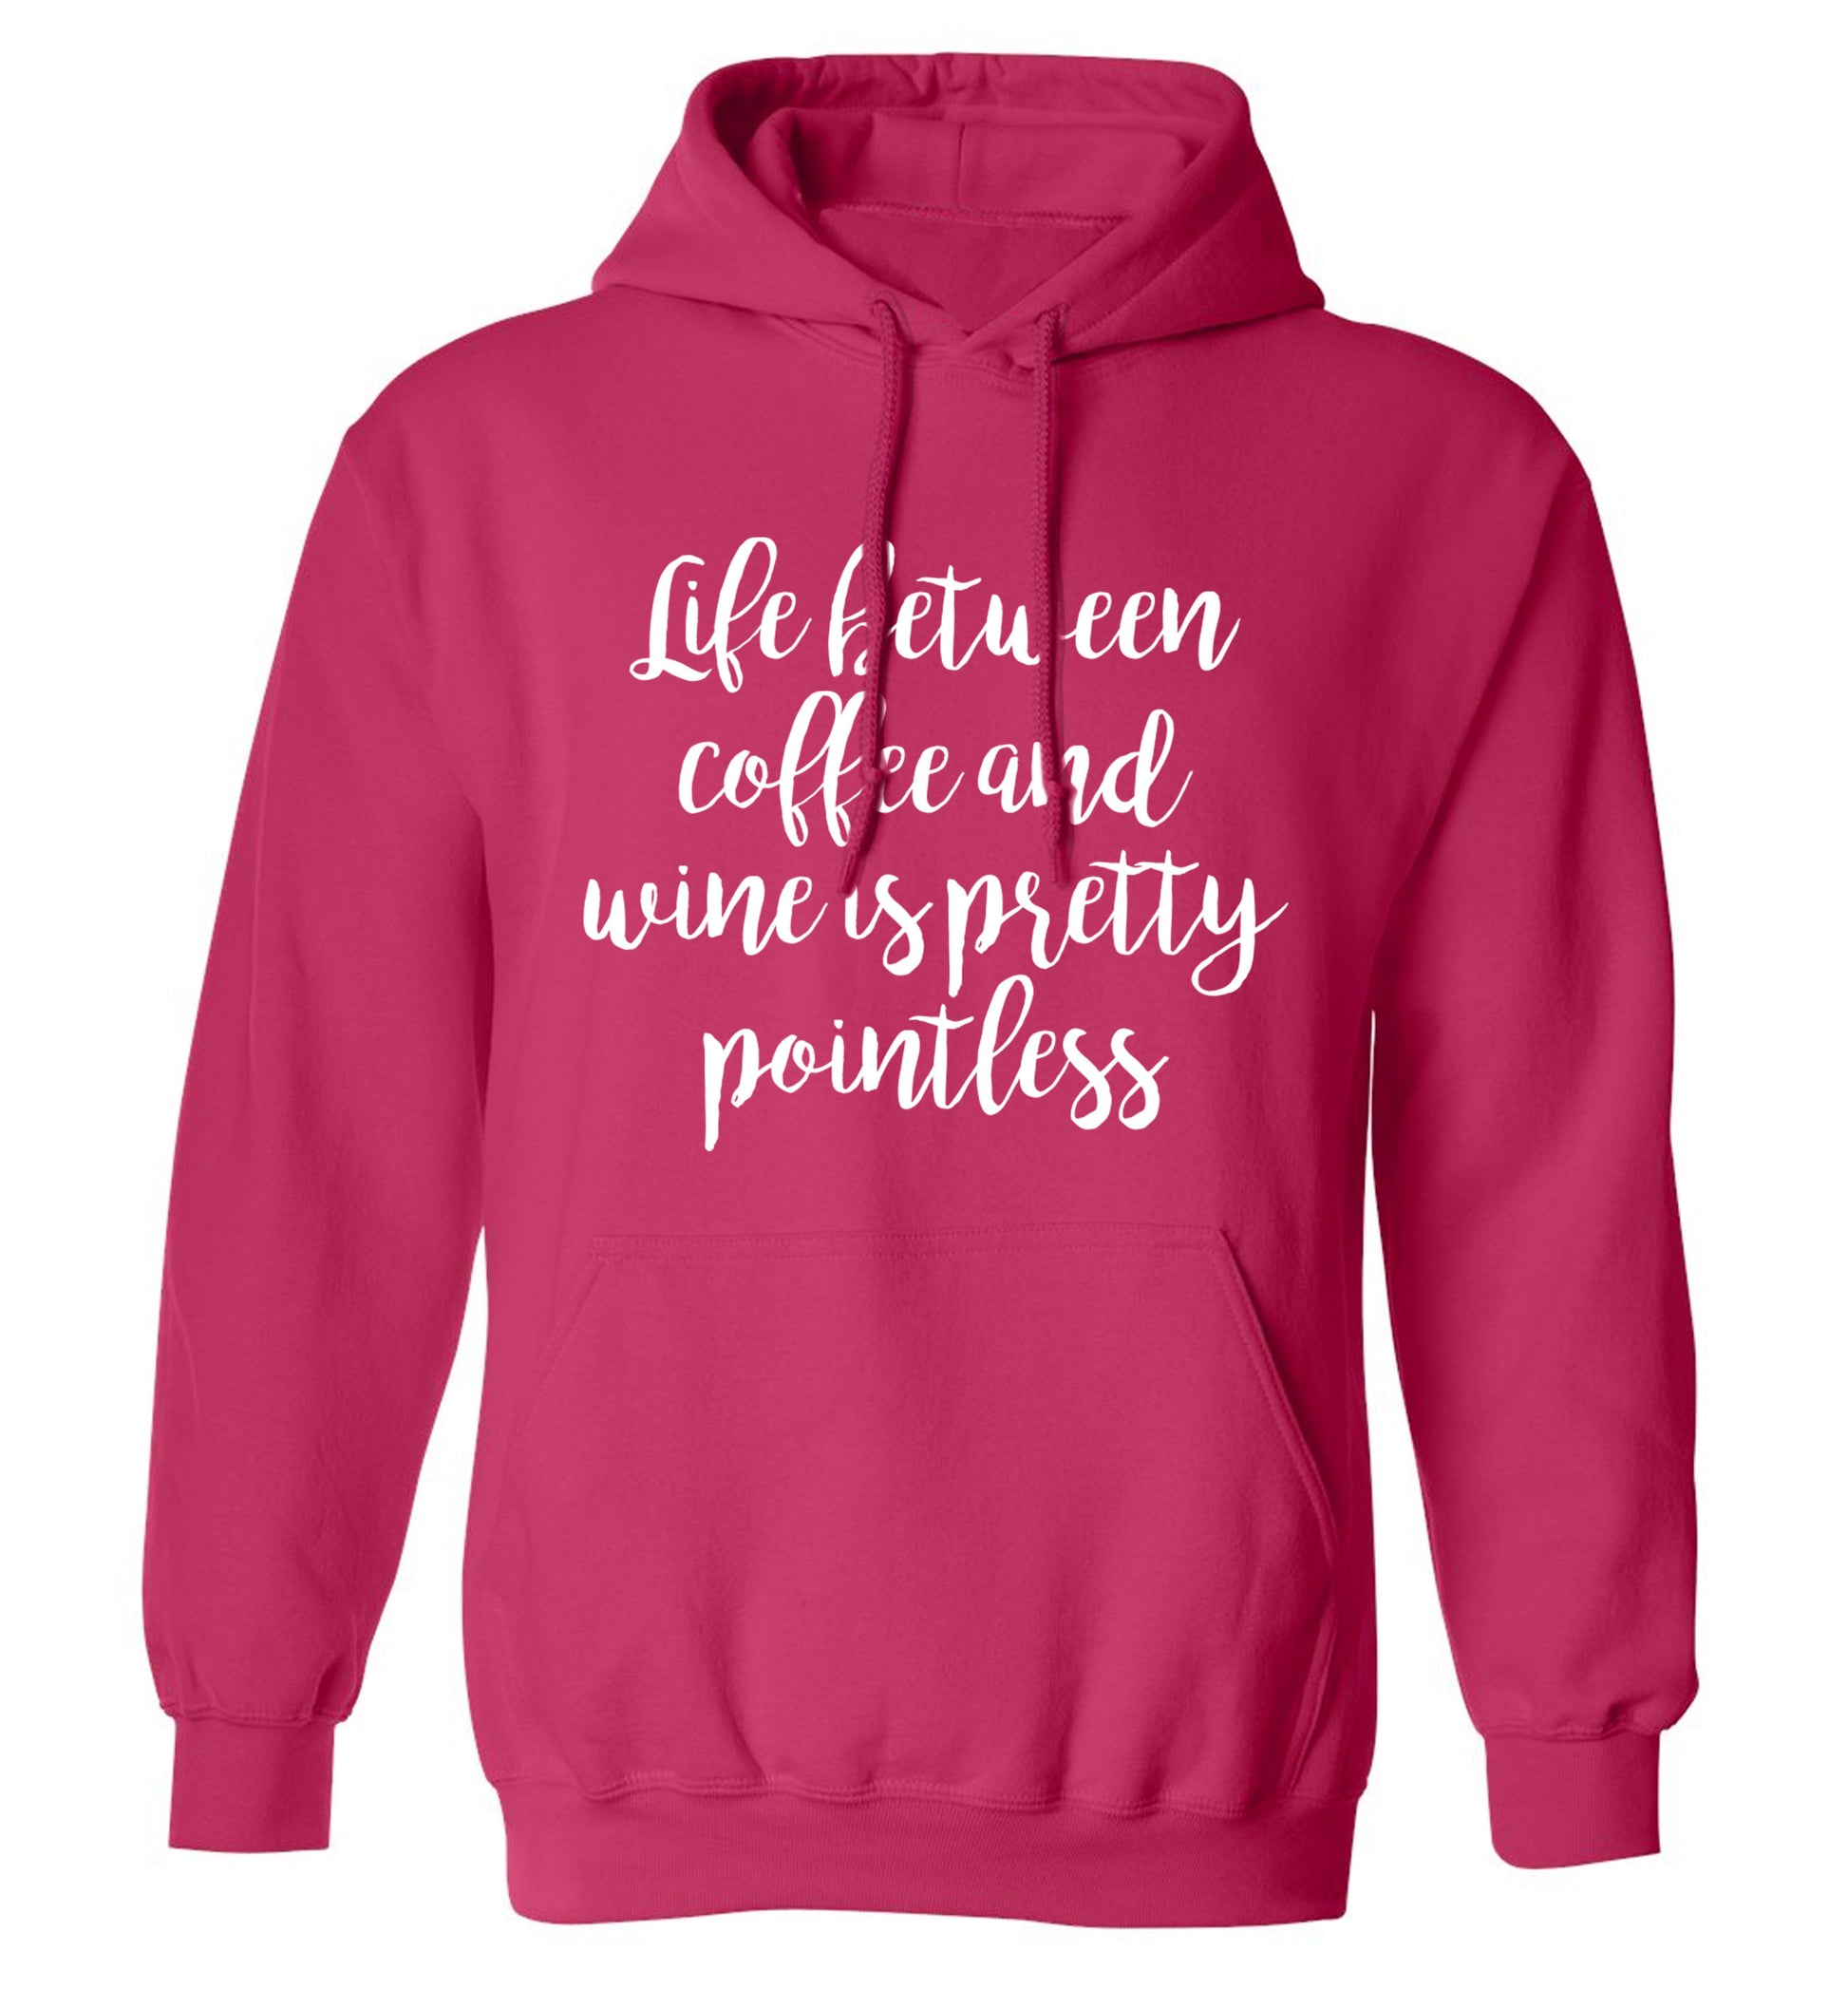 Life between coffee and wine is pretty pointless adults unisex pink hoodie 2XL